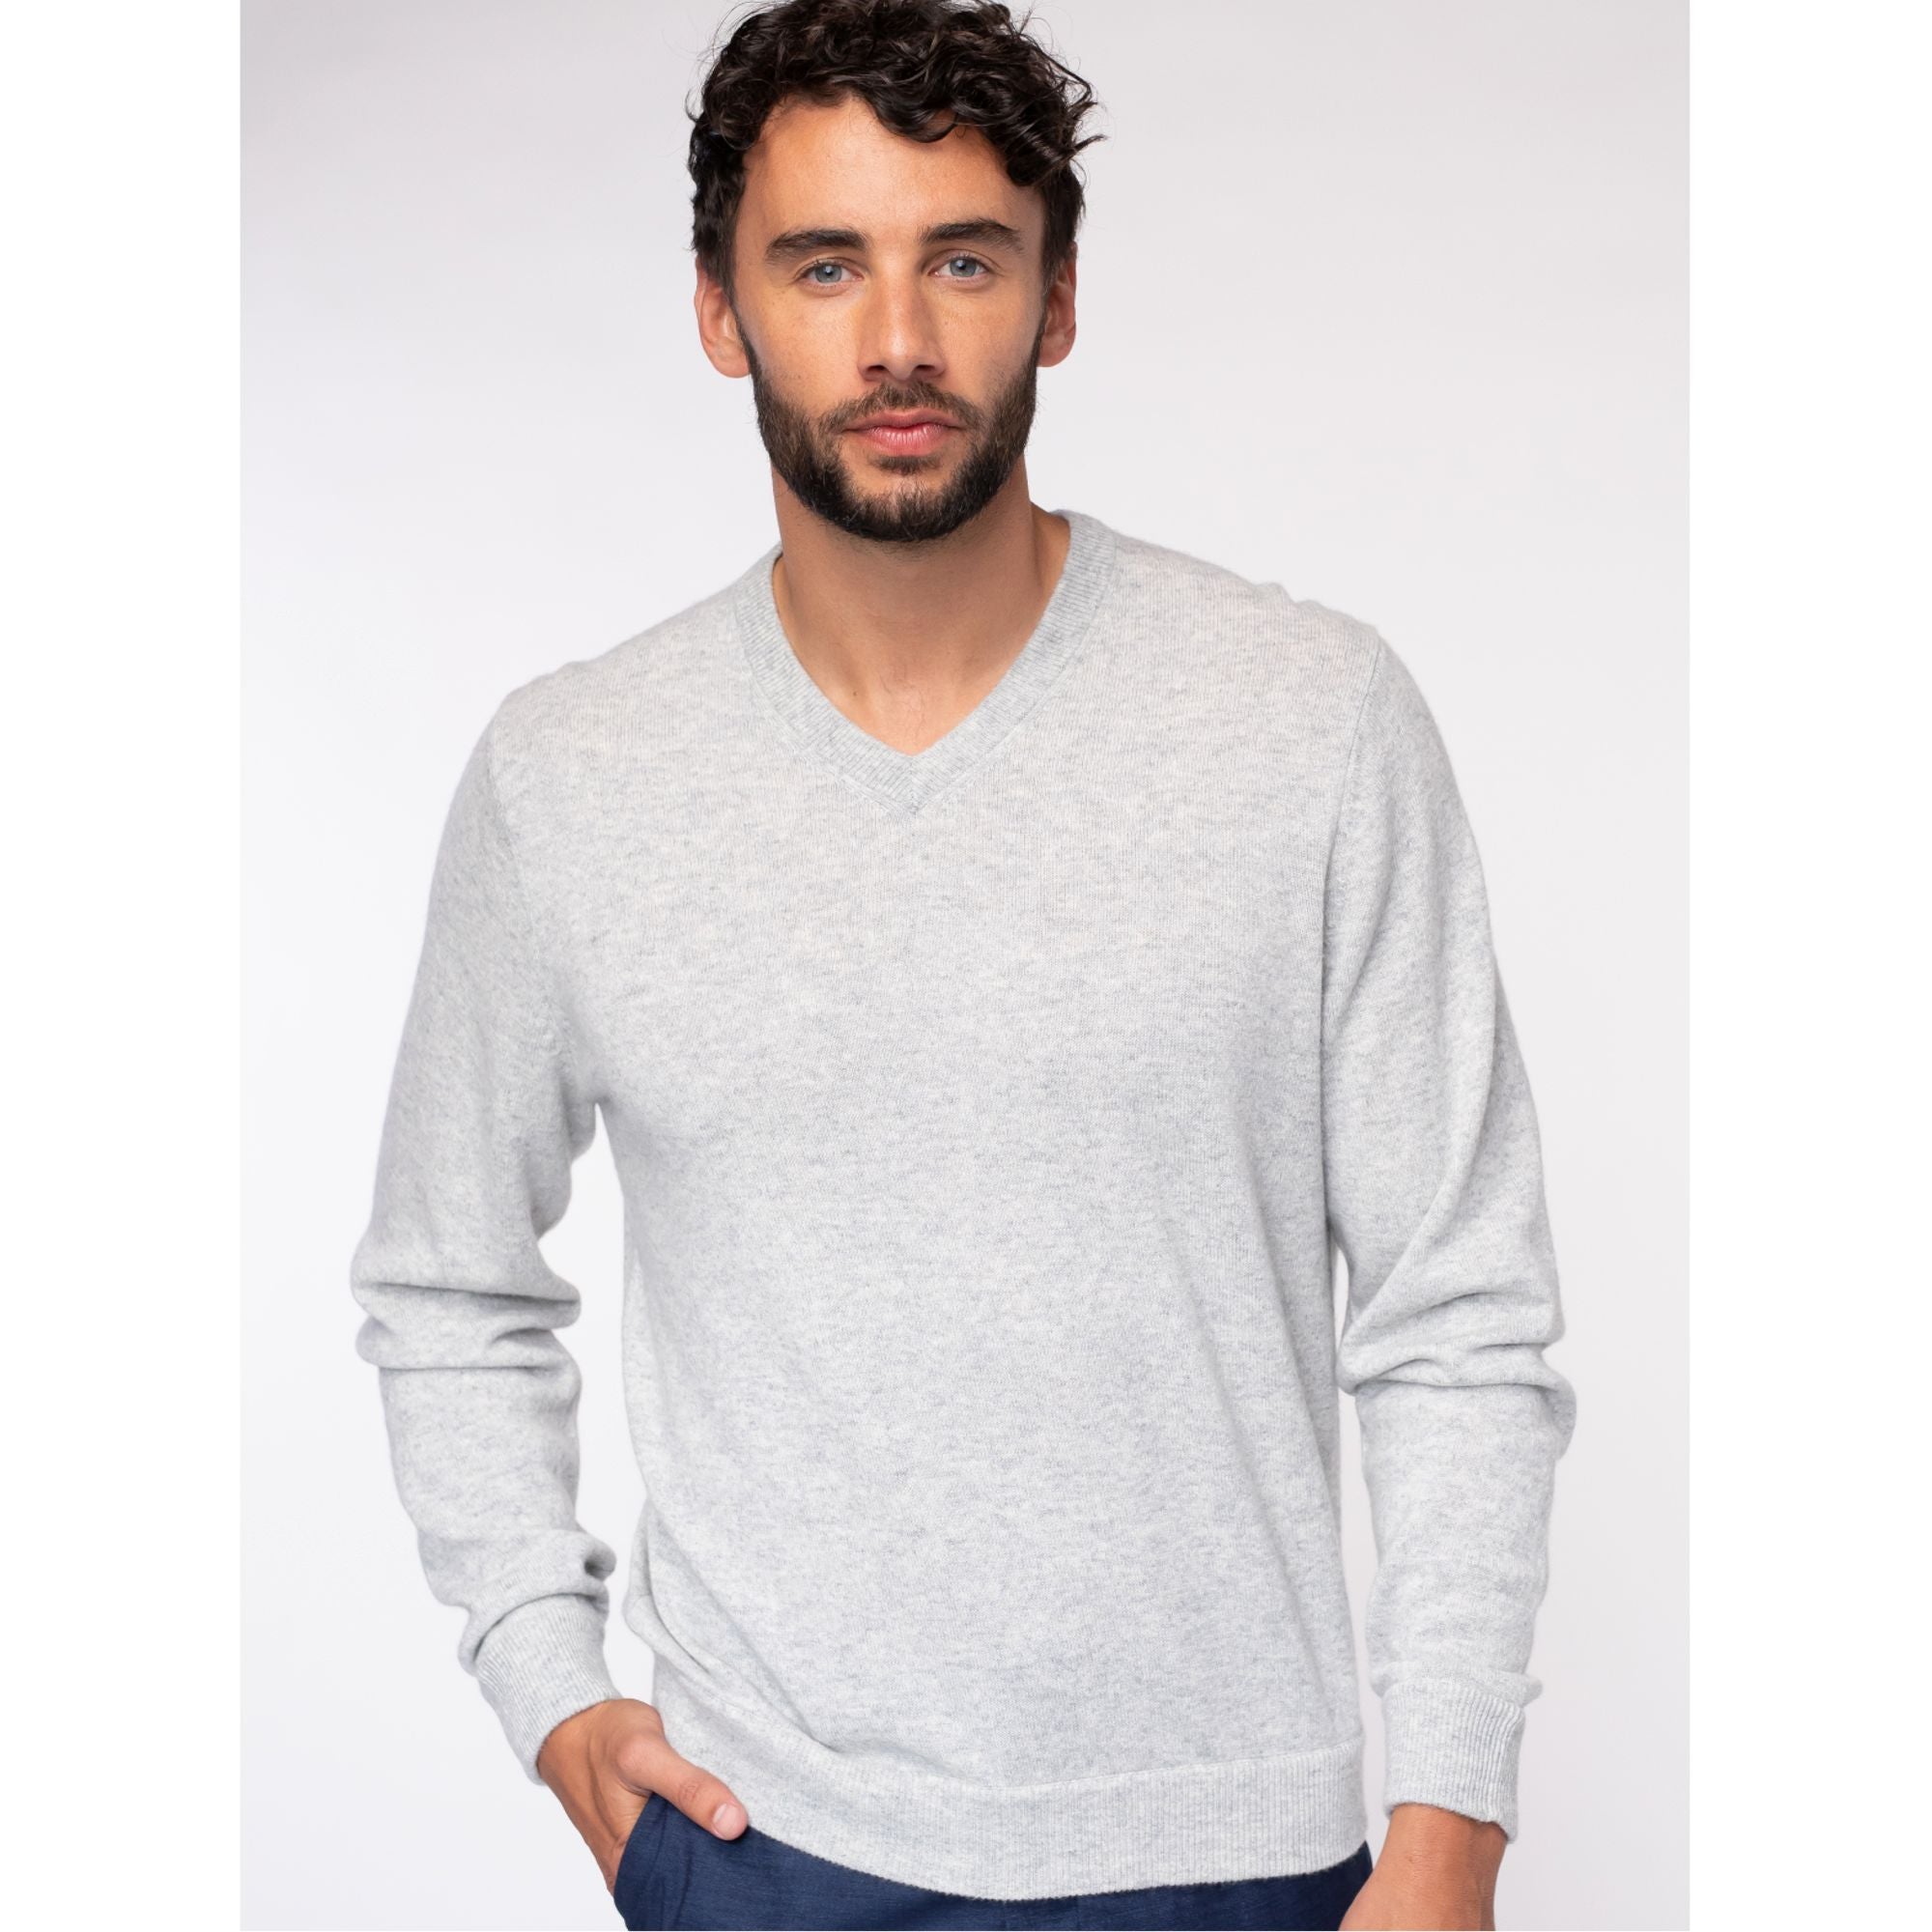 Classic V-Neck 100% Cashmere Sweater (Choice of Colors) by Alashan Cashmere